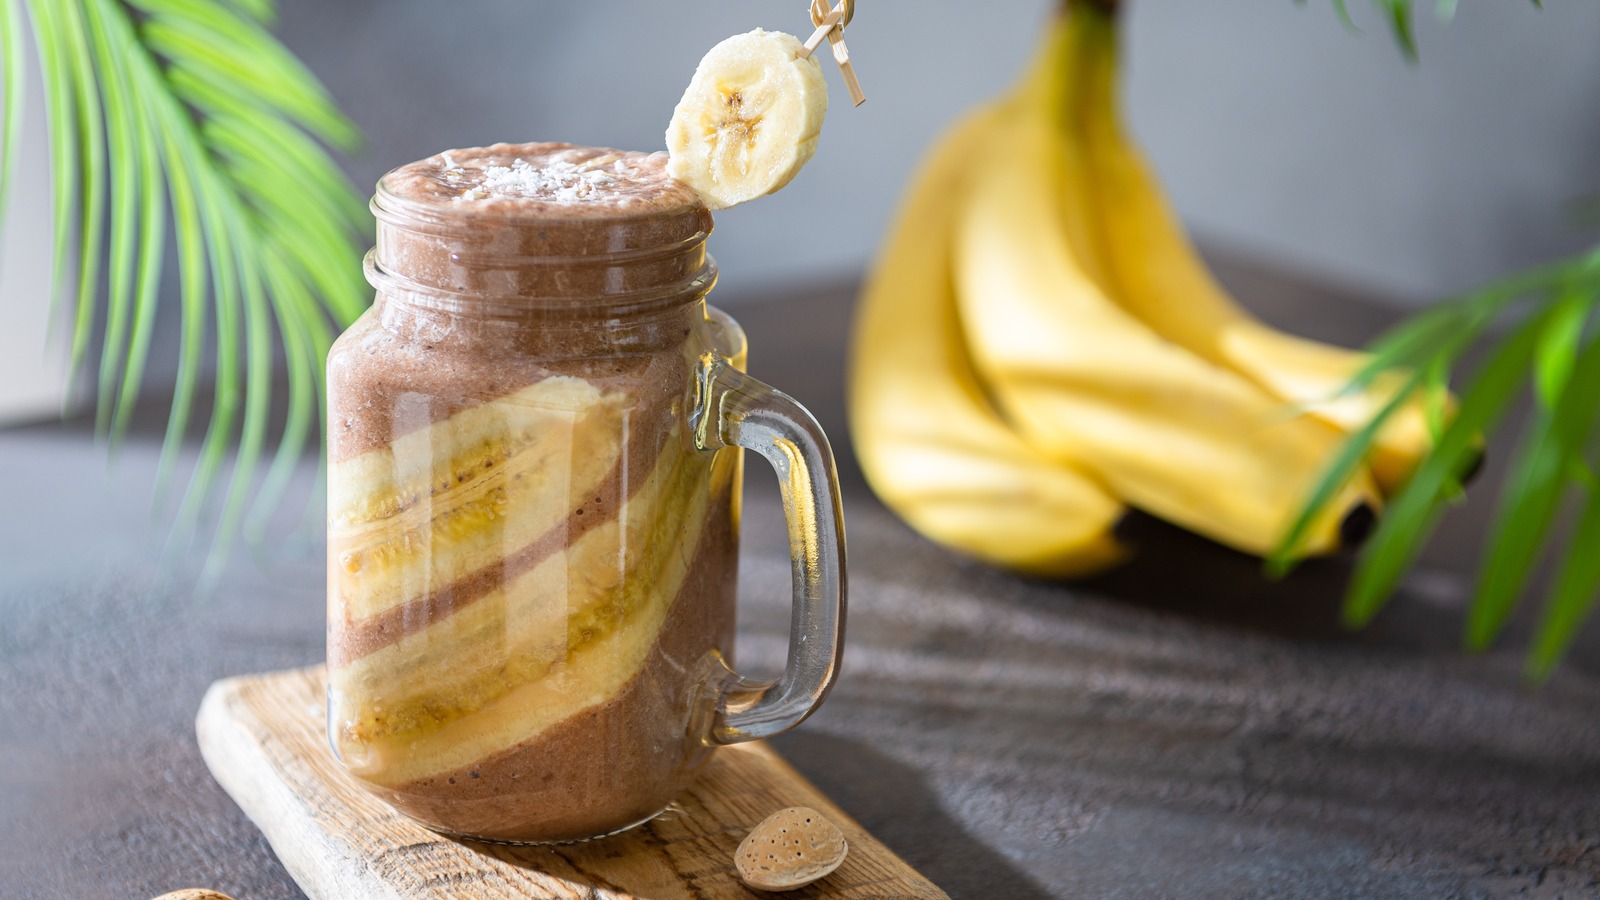 8 Mistakes You Make Every Time You Blend a Smoothie